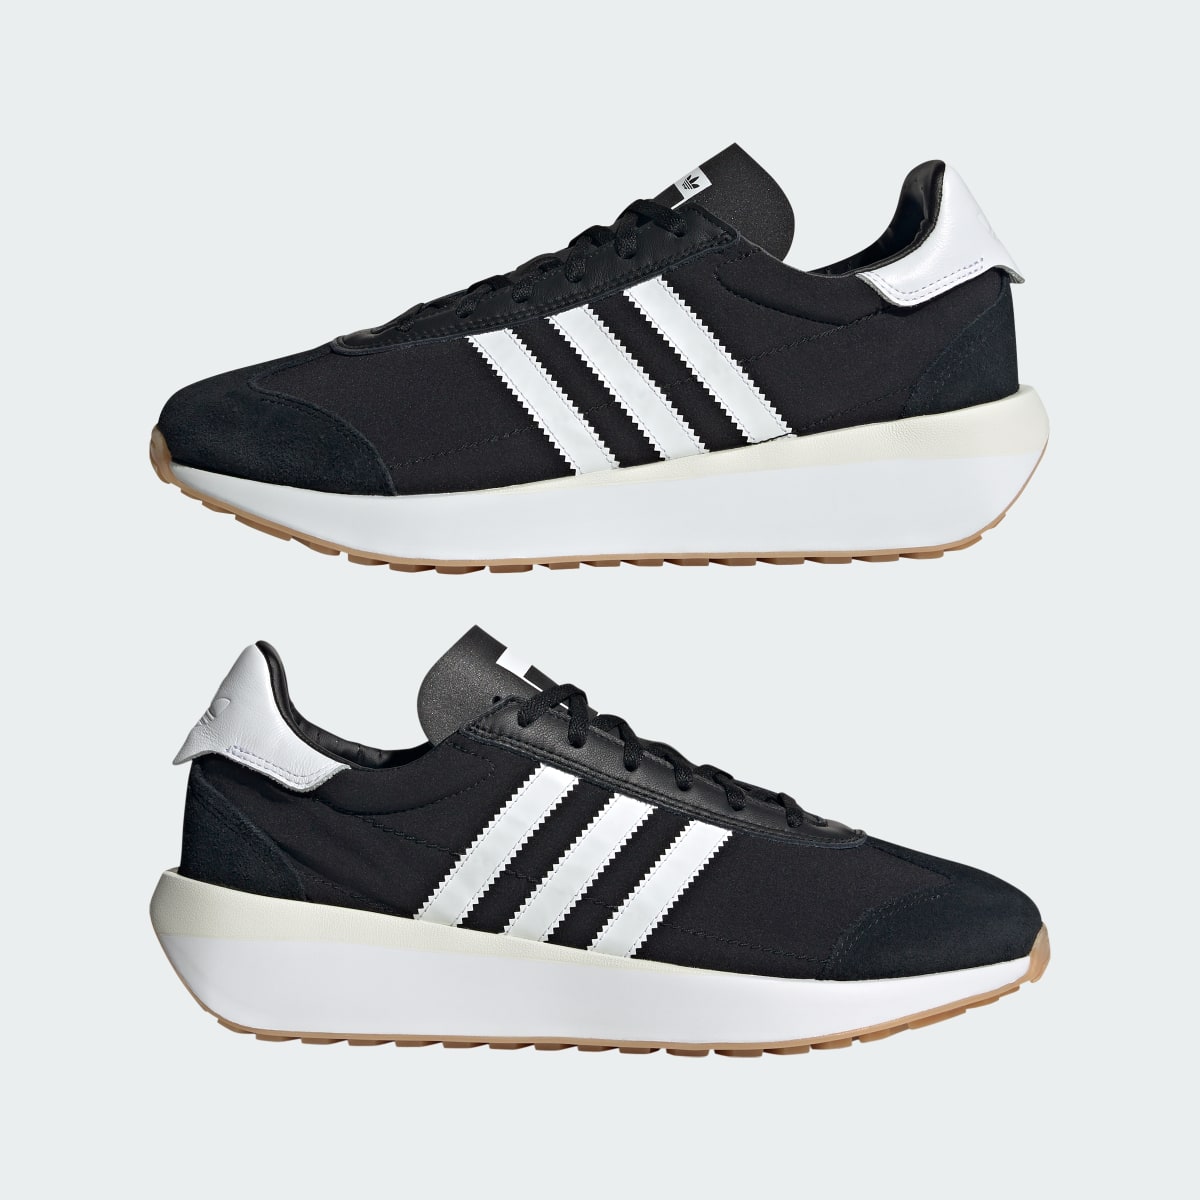 Adidas Country XLG Shoes. 7